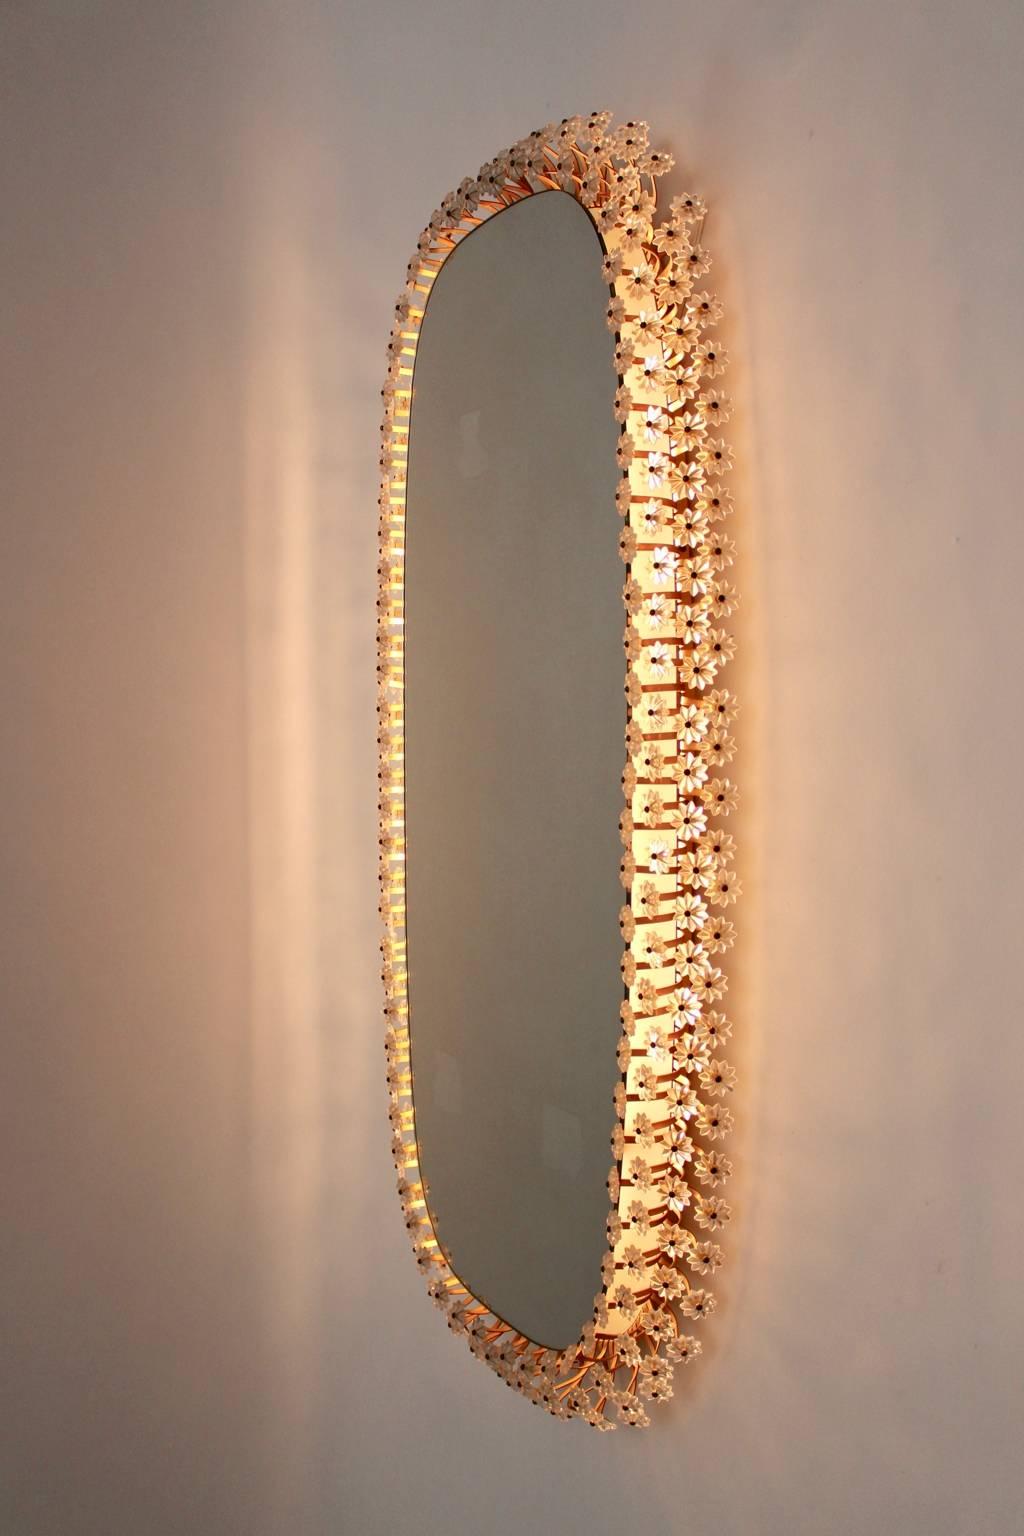 20th Century Illuminated Wall Mirror with Small Glass Flowers by Emil Stejnar, 1950s